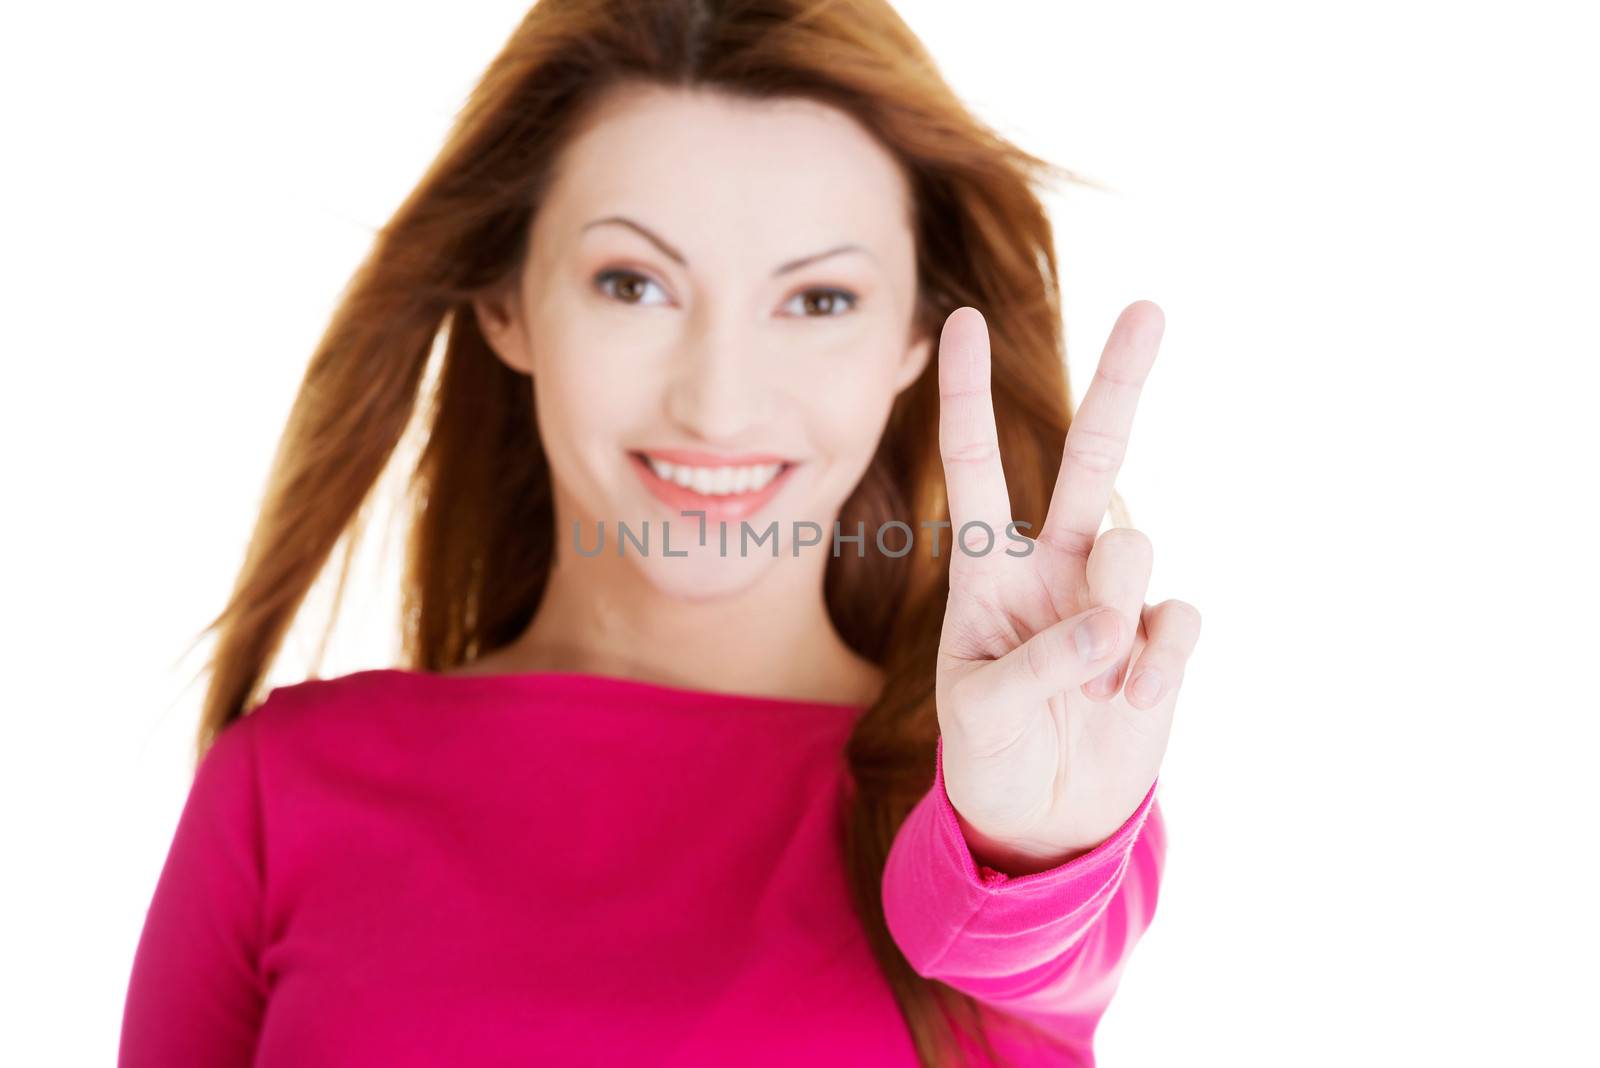 Woman showing victory sign by BDS